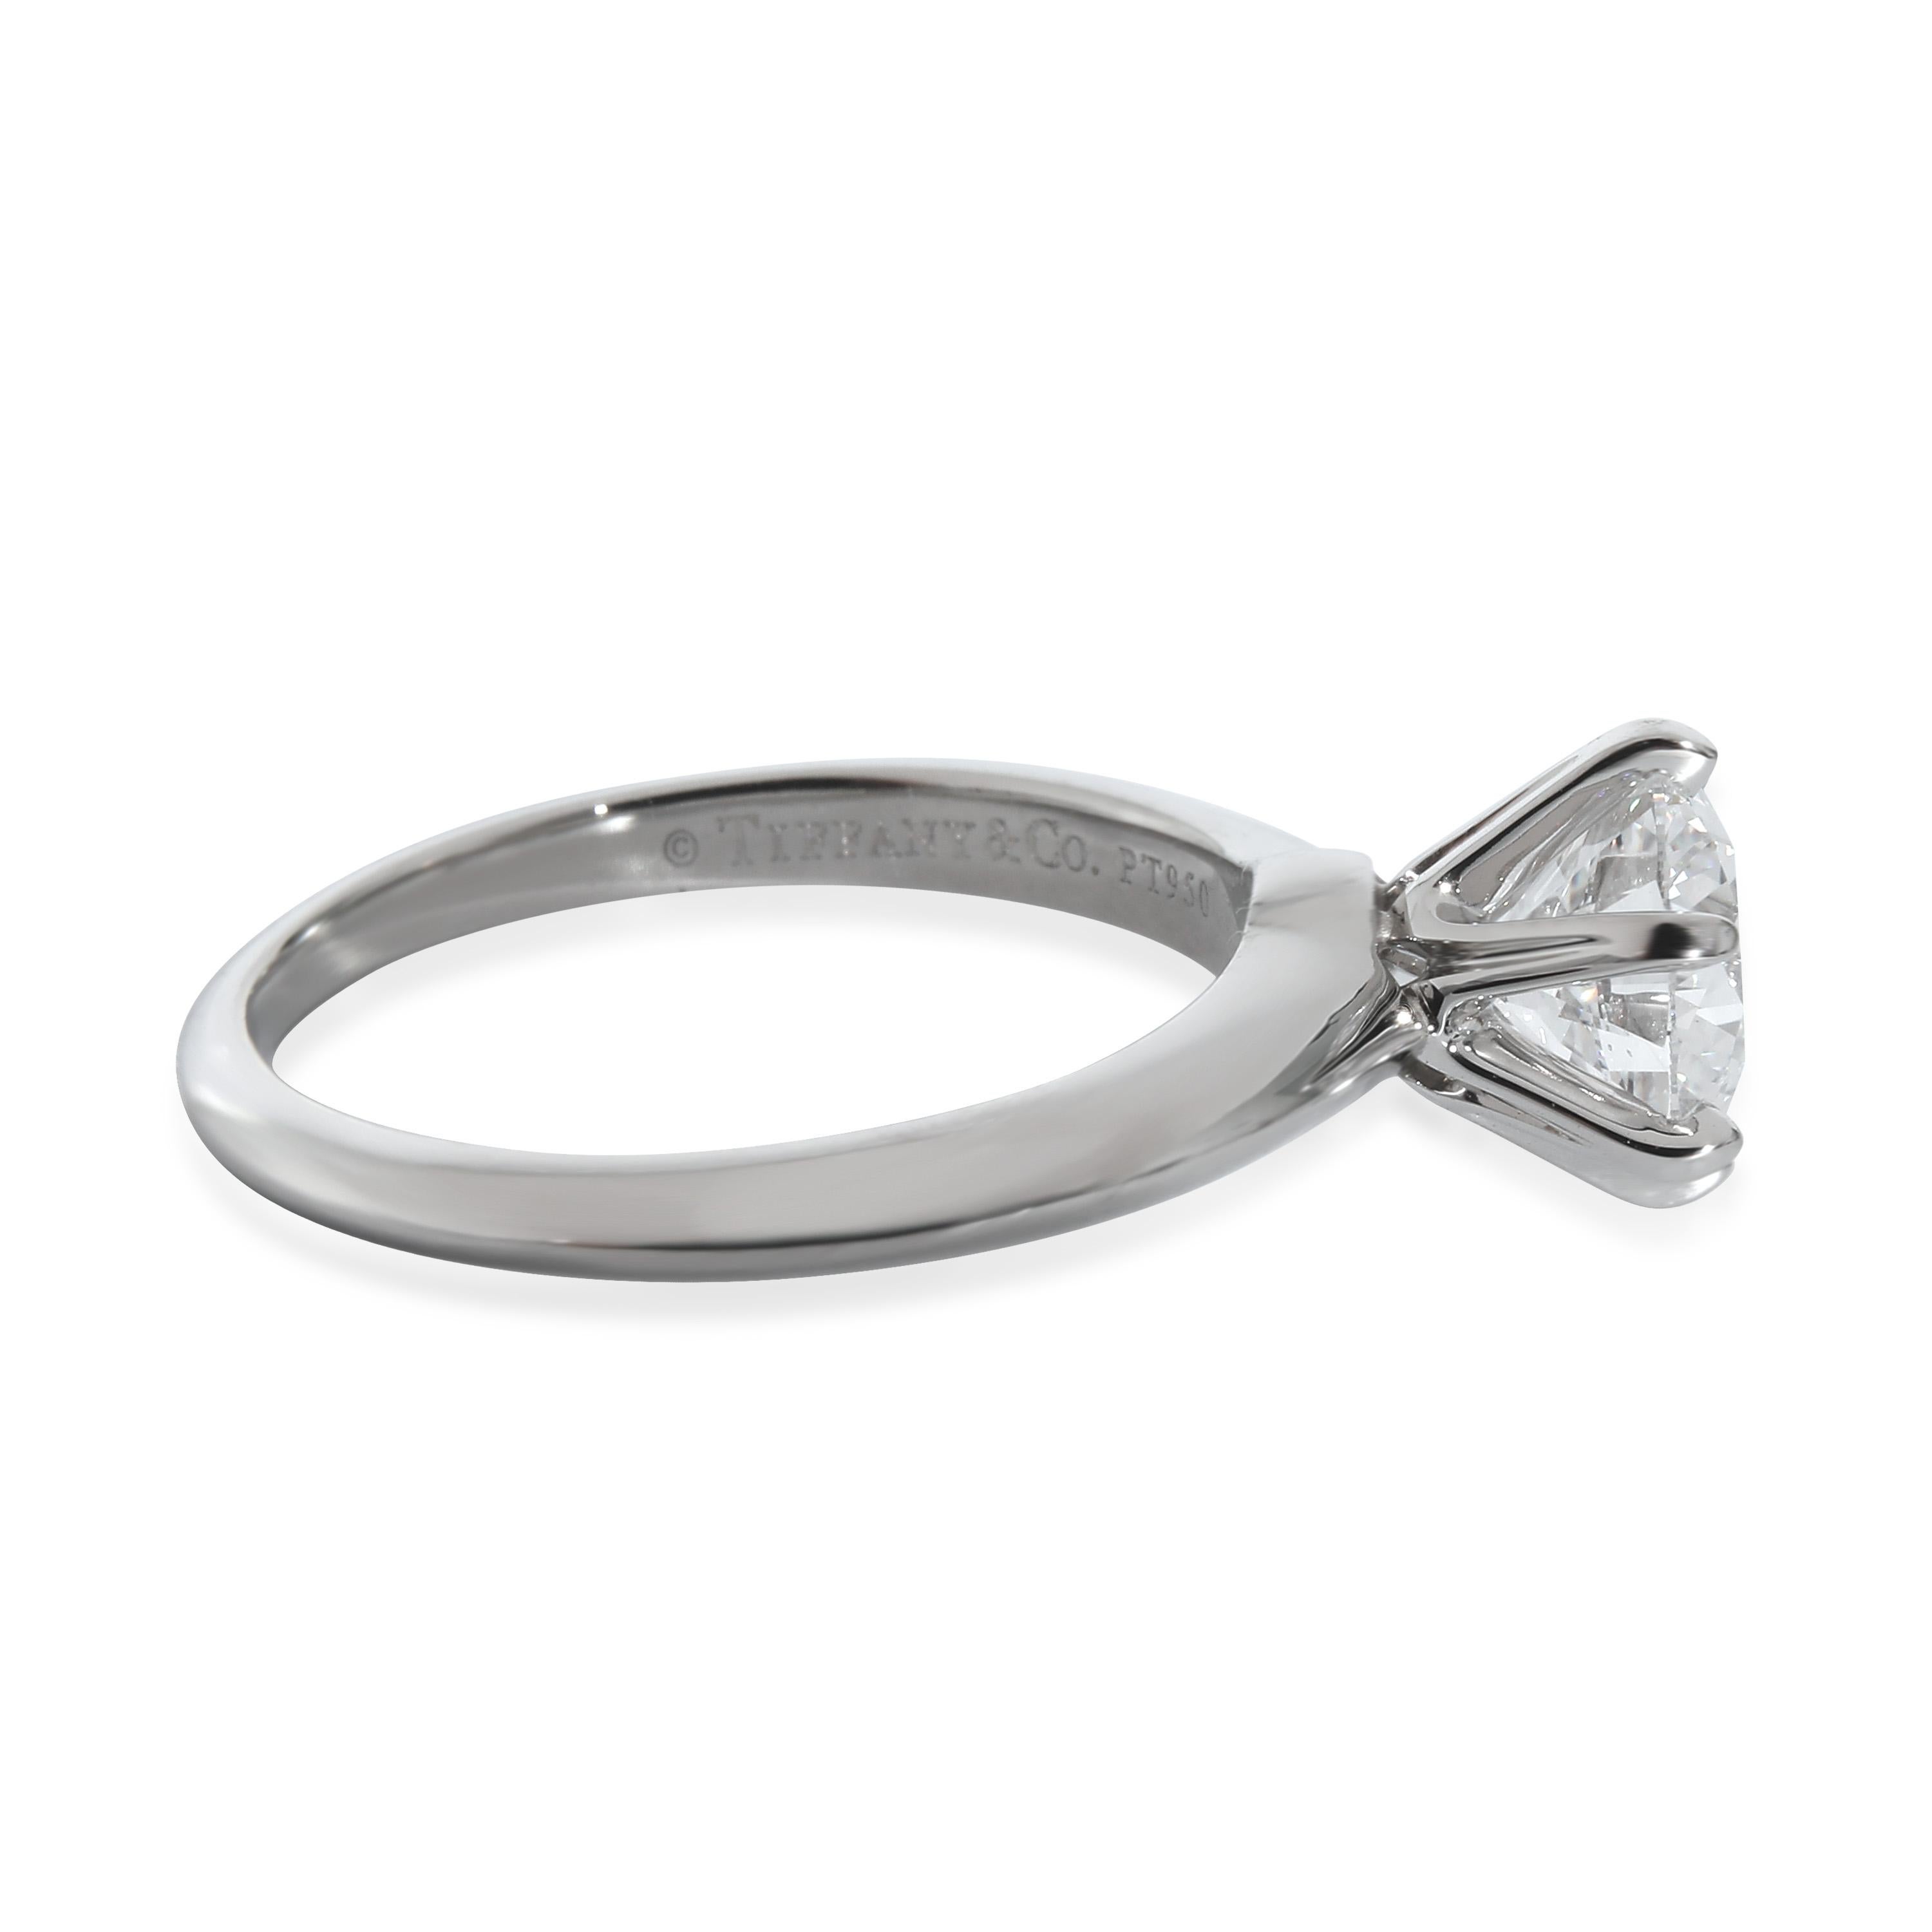 Tiffany & Co. Diamond Engagement Ring in  Platinum E VS2 1.29 CTW

PRIMARY DETAILS
SKU: 131850
Listing Title: Tiffany & Co. Diamond Engagement Ring in  Platinum E VS2 1.29 CTW
Condition Description: Retails for 25000 USD. In excellent condition and